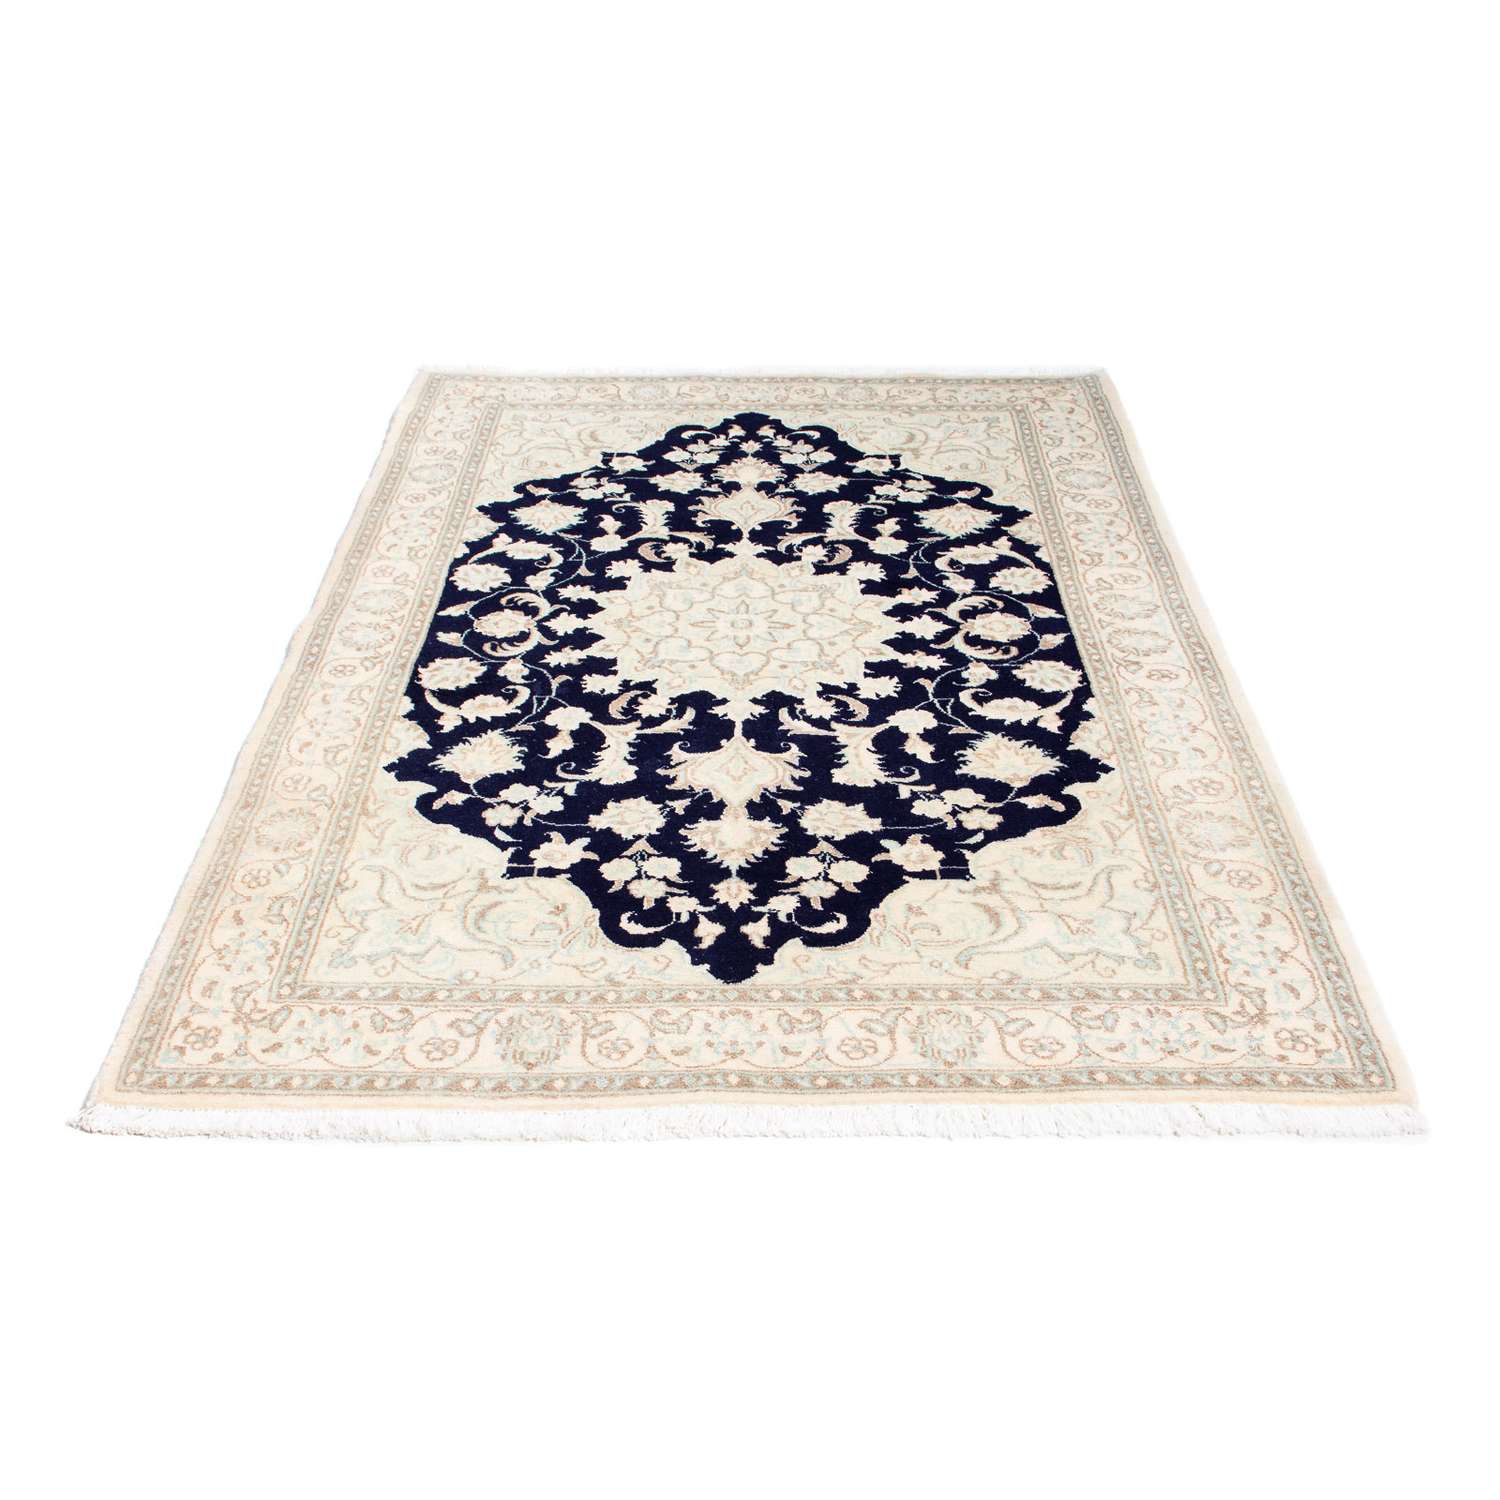 Persisk teppe - Nain - 189 x 130 cm - beige